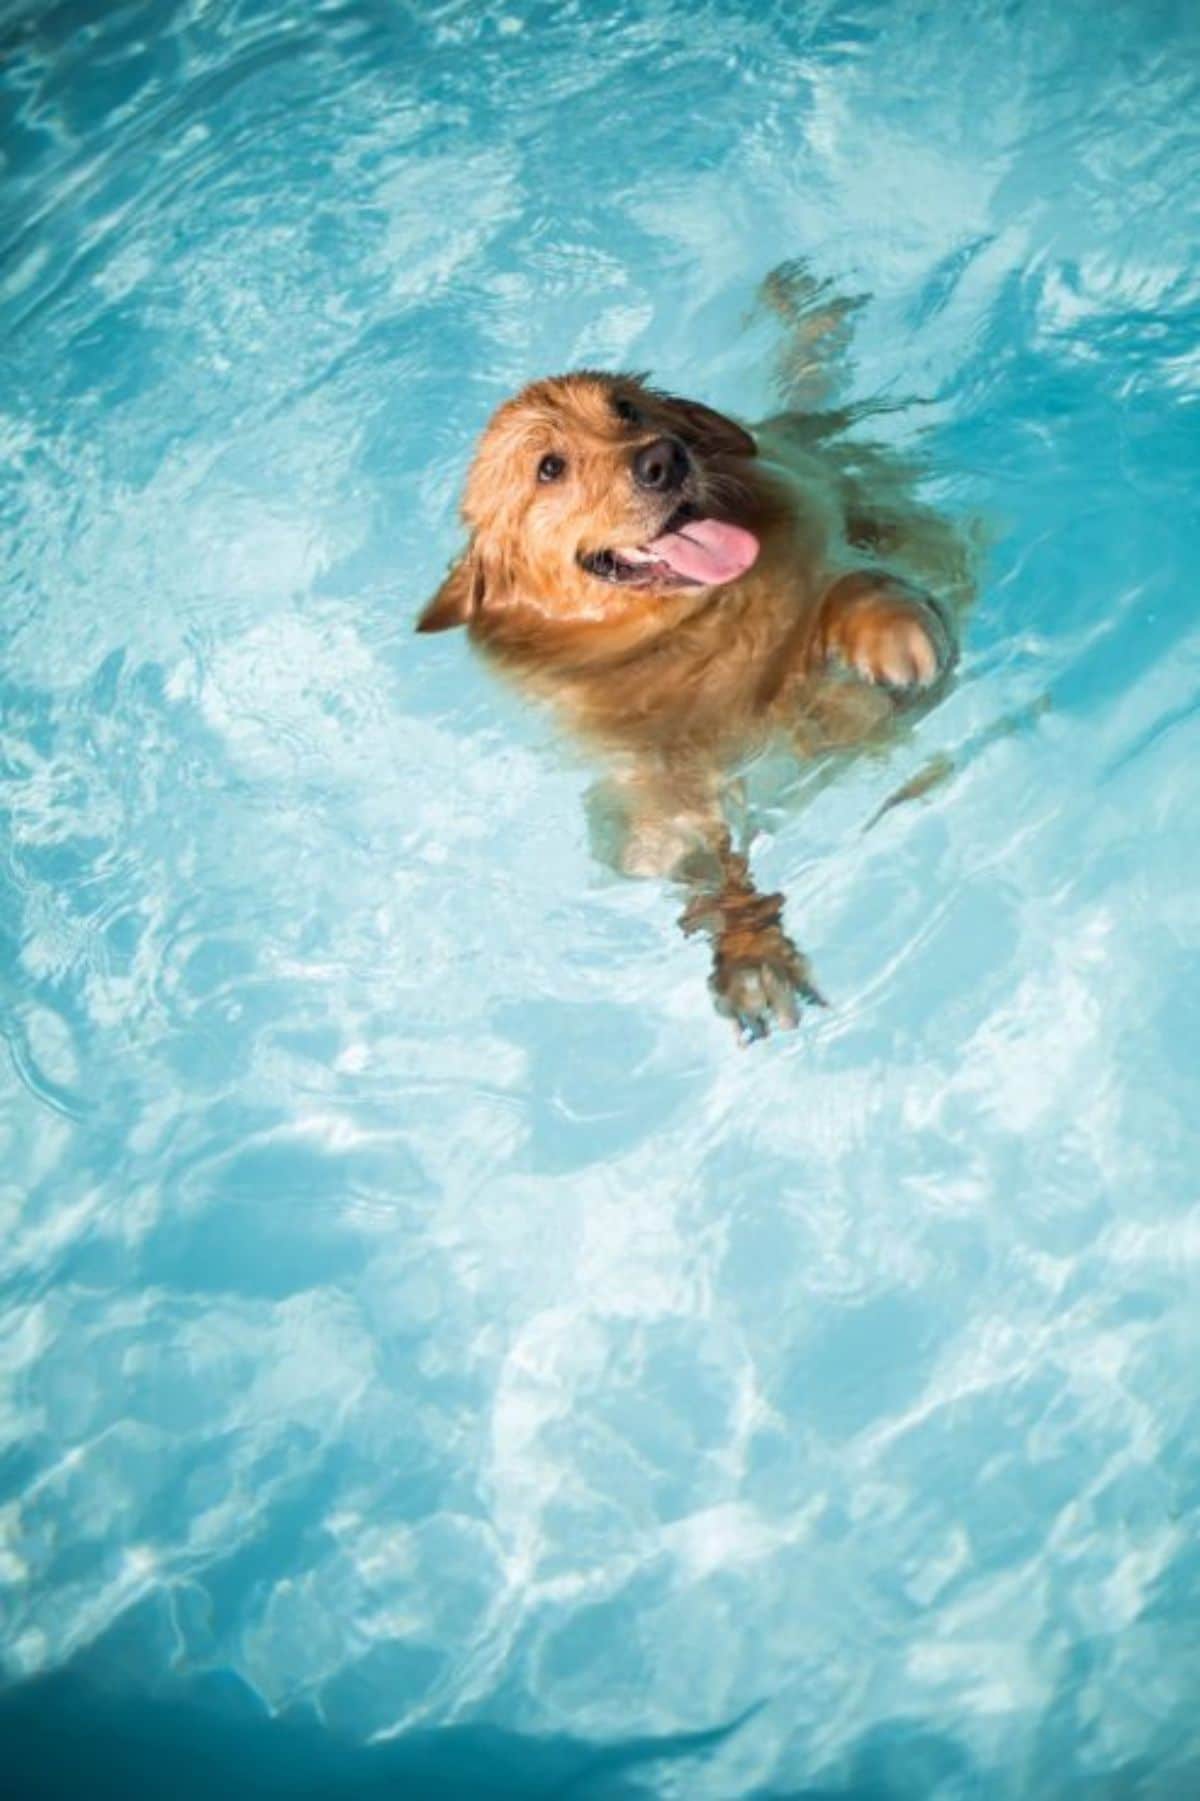 golden retriever with its tongue sticking out swimming in a pool